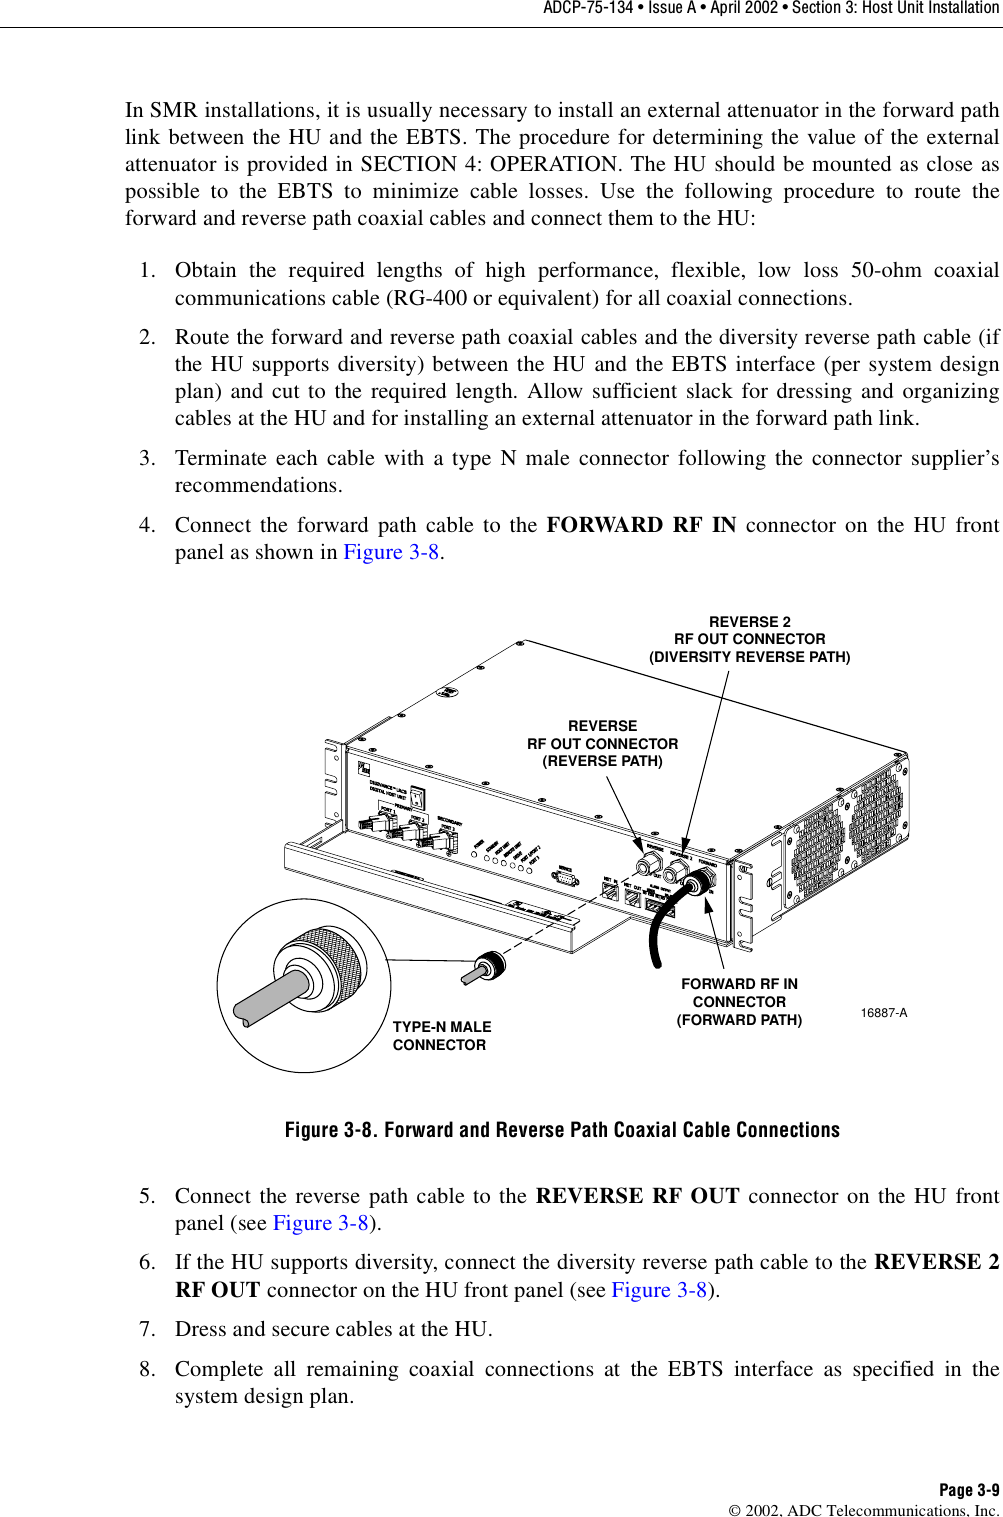 ADCP-75-134 • Issue A • April 2002 • Section 3: Host Unit InstallationPage 3-9©2002, ADC Telecommunications, Inc.In SMR installations, it is usually necessary to install an external attenuator in the forward pathlink between the HU and the EBTS. The procedure for determining the value of the externalattenuator is provided in SECTION 4: OPERATION. The HU should be mounted as close aspossible to the EBTS to minimize cable losses. Use the following procedure to route theforward and reverse path coaxial cables and connect them to the HU:1. Obtain the required lengths of high performance, flexible, low loss 50-ohm coaxialcommunications cable (RG-400 or equivalent) for all coaxial connections.2. Route the forward and reverse path coaxial cables and the diversity reverse path cable (ifthe HU supports diversity) between the HU and the EBTS interface (per system designplan) and cut to the required length. Allow sufficient slack for dressing and organizingcables at the HU and for installing an external attenuator in the forward path link.3. Terminate each cable with atype Nmale connector following the connector supplier’srecommendations.4. Connect the forward path cable to the FORWARD RF IN connector on the HU frontpanel as shown in Figure 3-8.Figure 3-8. Forward and Reverse Path Coaxial Cable Connections5. Connect the reverse path cable to the REVERSE RF OUT connector on the HU frontpanel (see Figure 3-8).6. If the HU supports diversity, connect the diversity reverse path cable to the REVERSE 2RF OUT connector on the HU front panel (see Figure 3-8).7. Dress and secure cables at the HU.8. Complete all remaining coaxial connections at the EBTS interface as specified in thesystem design plan.16887-ATYPE-N MALECONNECTORFORWARD RF INCONNECTOR(FORWARD PATH)REVERSERF OUT CONNECTOR(REVERSE PATH)REVERSE 2RF OUT CONNECTOR(DIVERSITY REVERSE PATH)